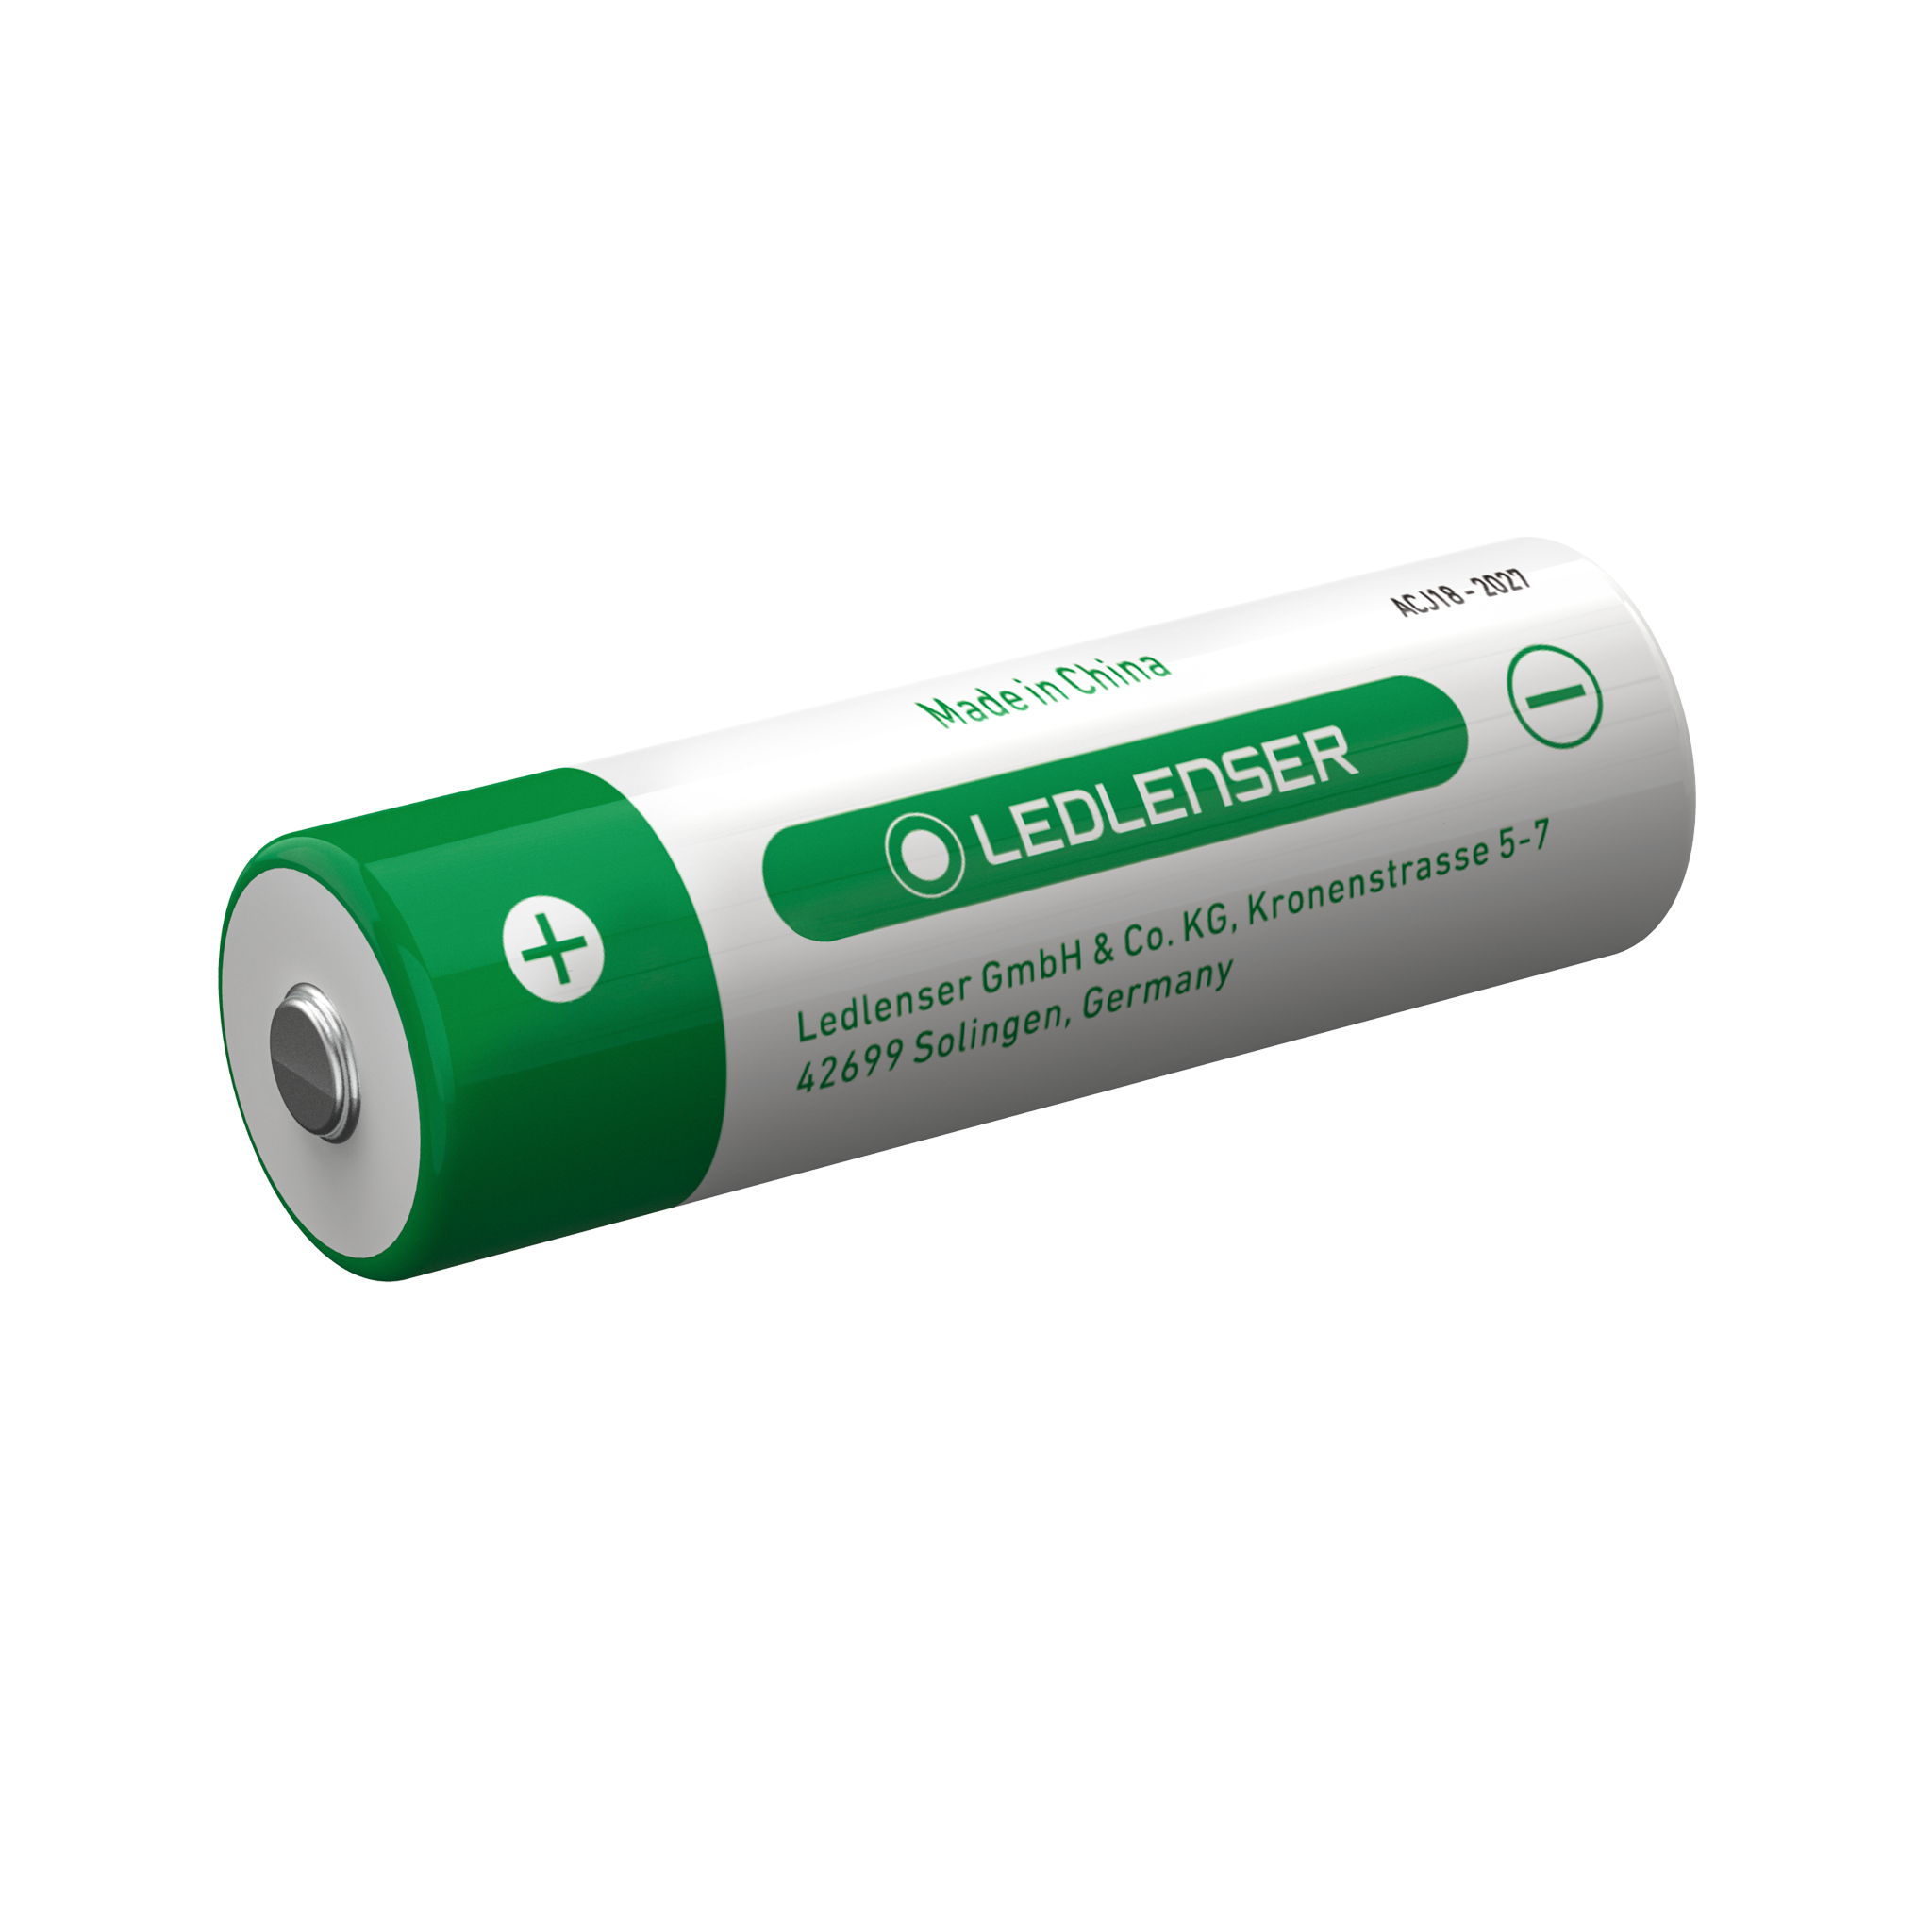 21700 Li-ion Rechargeable Battery For P7R Core, P7R Work, P7R Sign